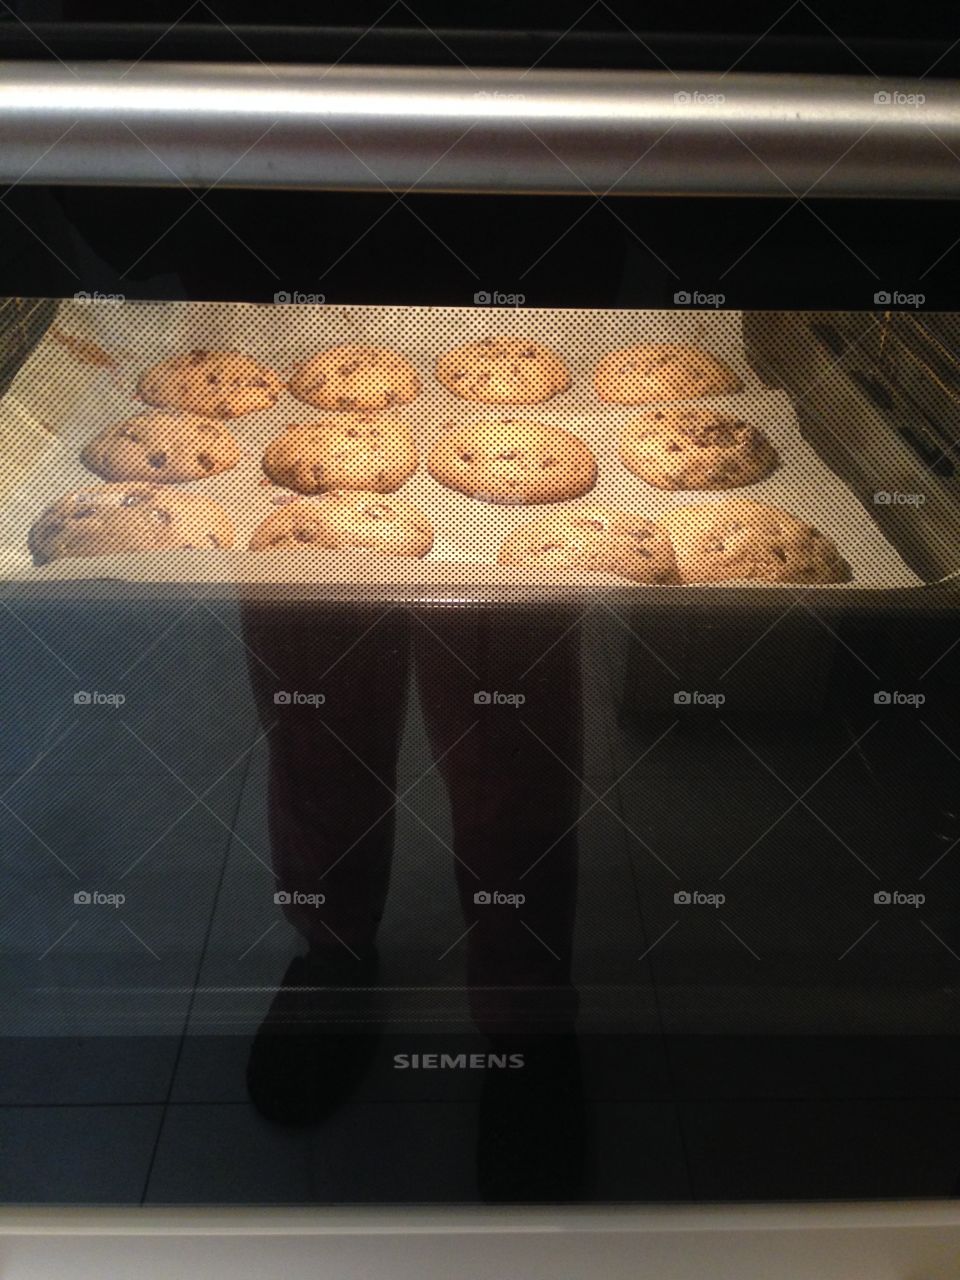 Cookies 🍪 in the oven 